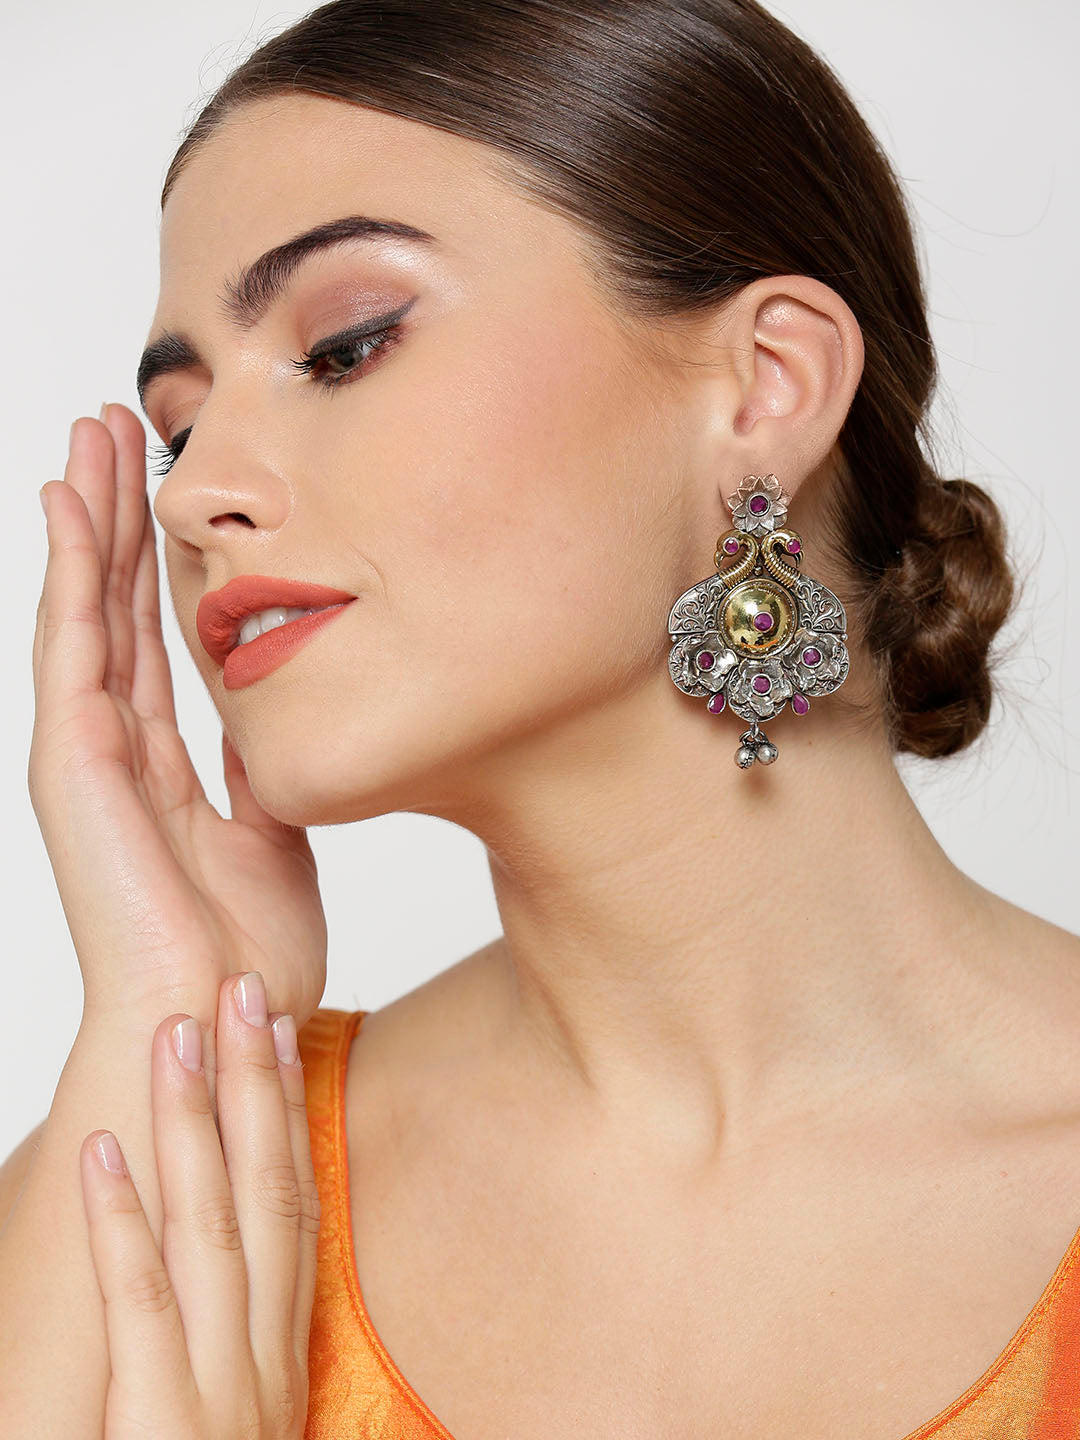 Oxidized Dual-Toned Magenta Stones Studded Peacock Inspired Antique Drop Earrings